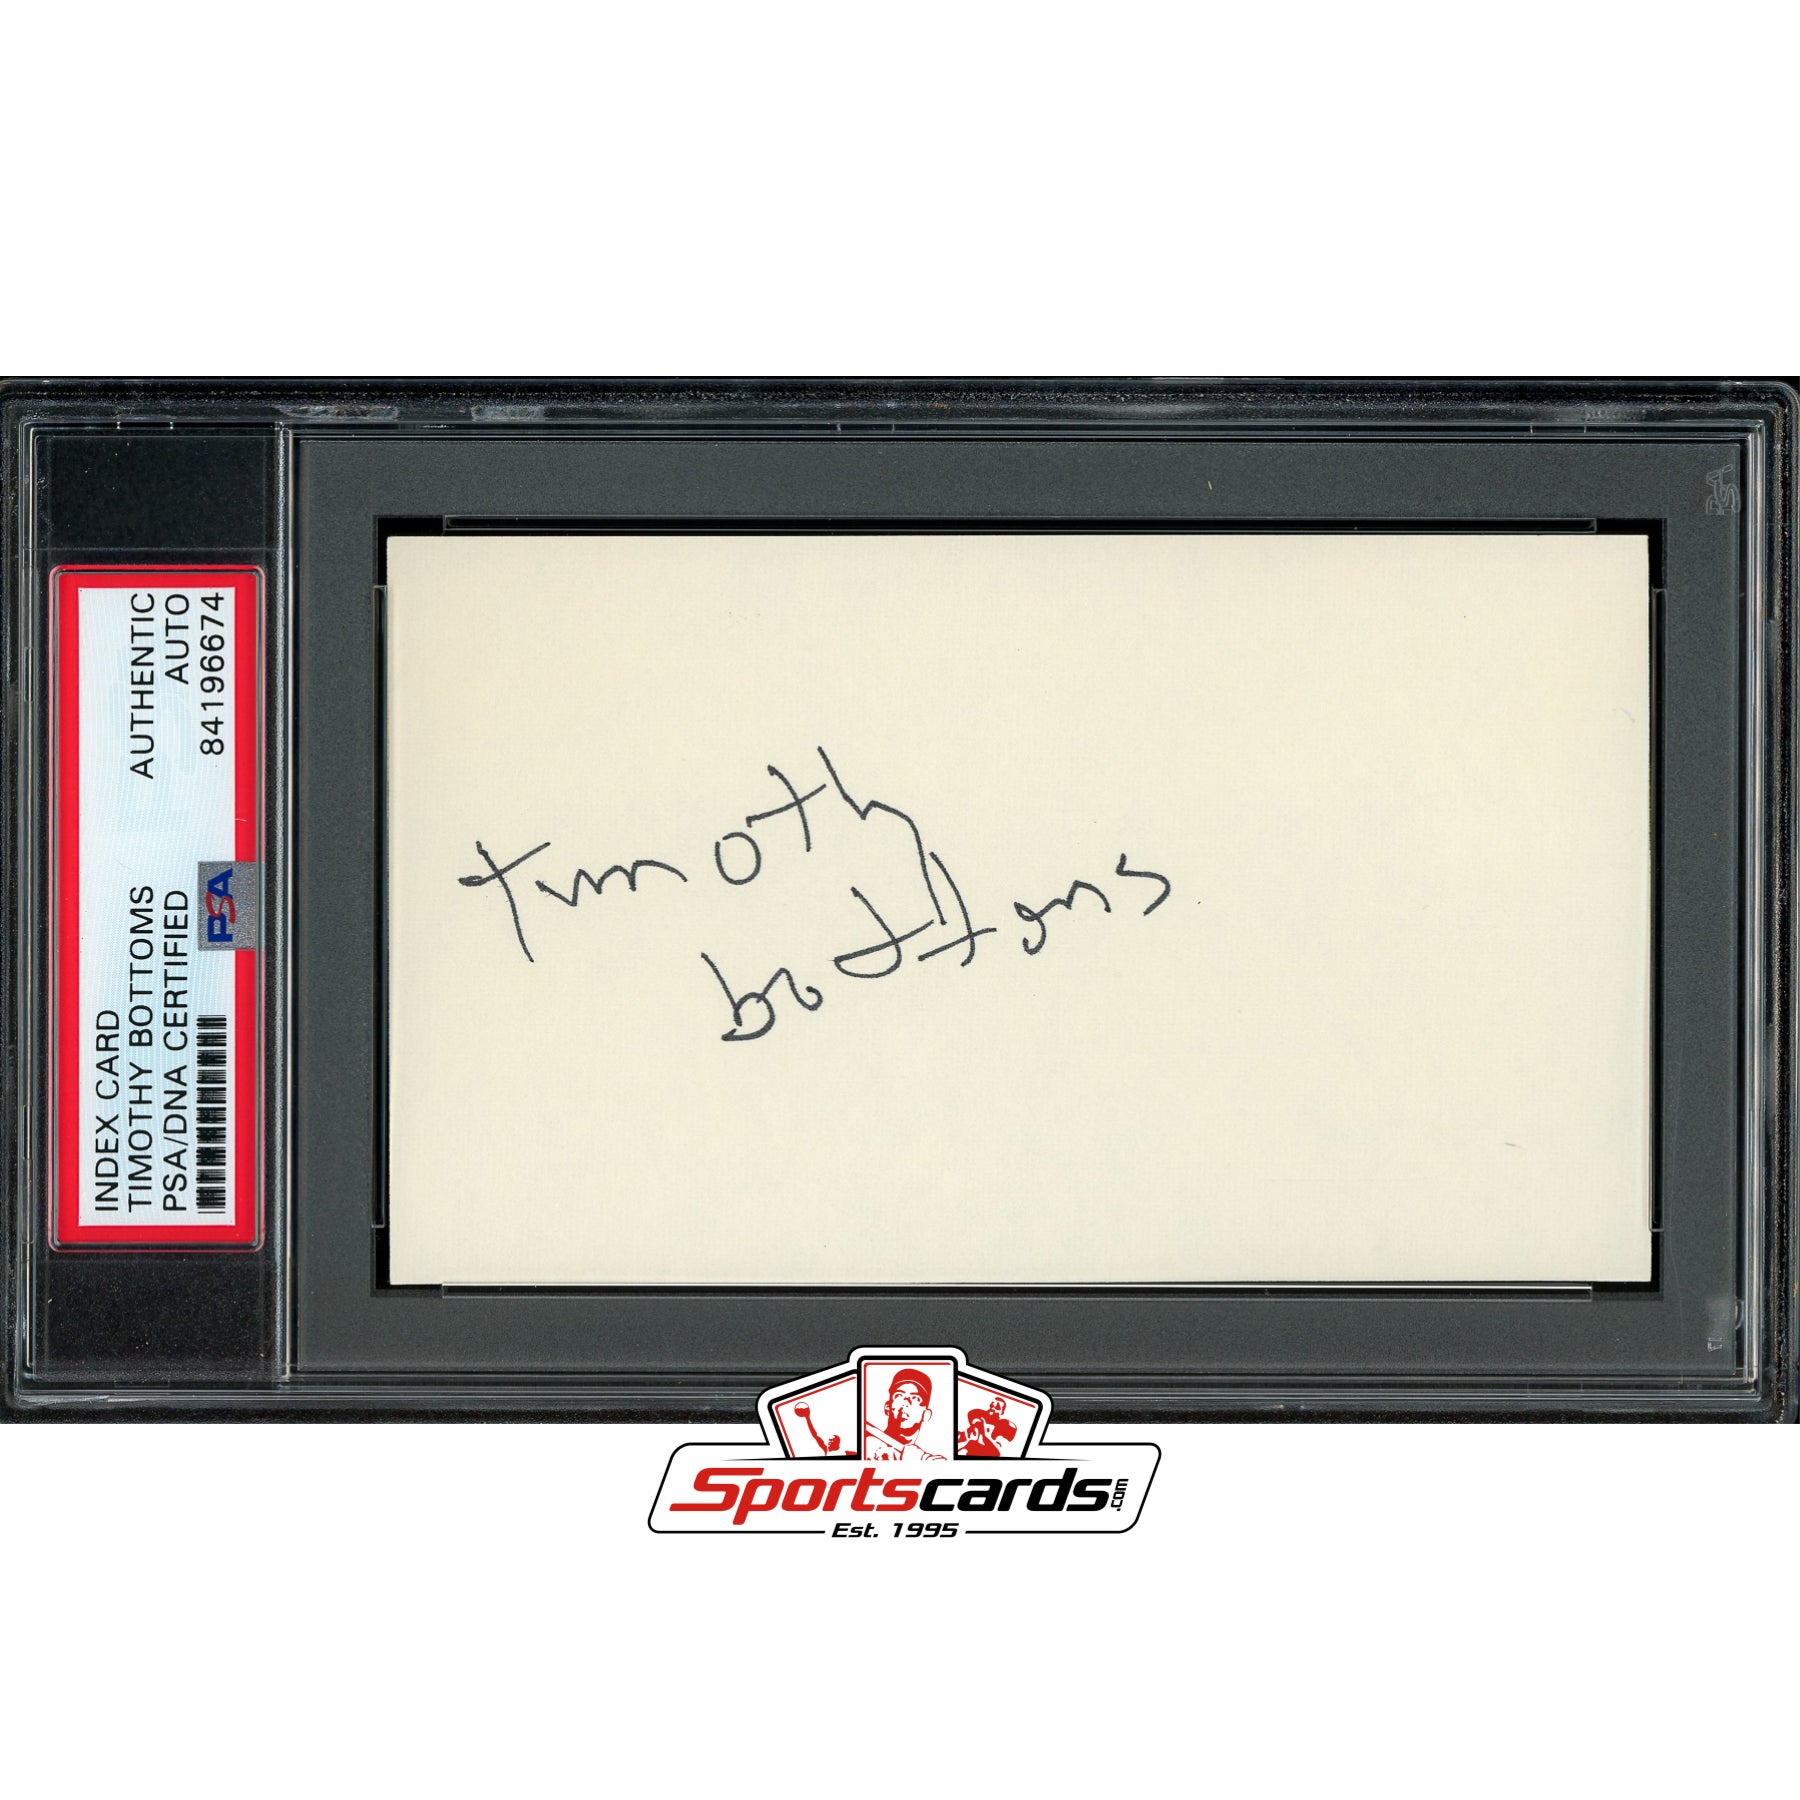 Timothy Bottoms Signed Auto 3x5 Index Card PSA/DNA Actor The Last Picture Show